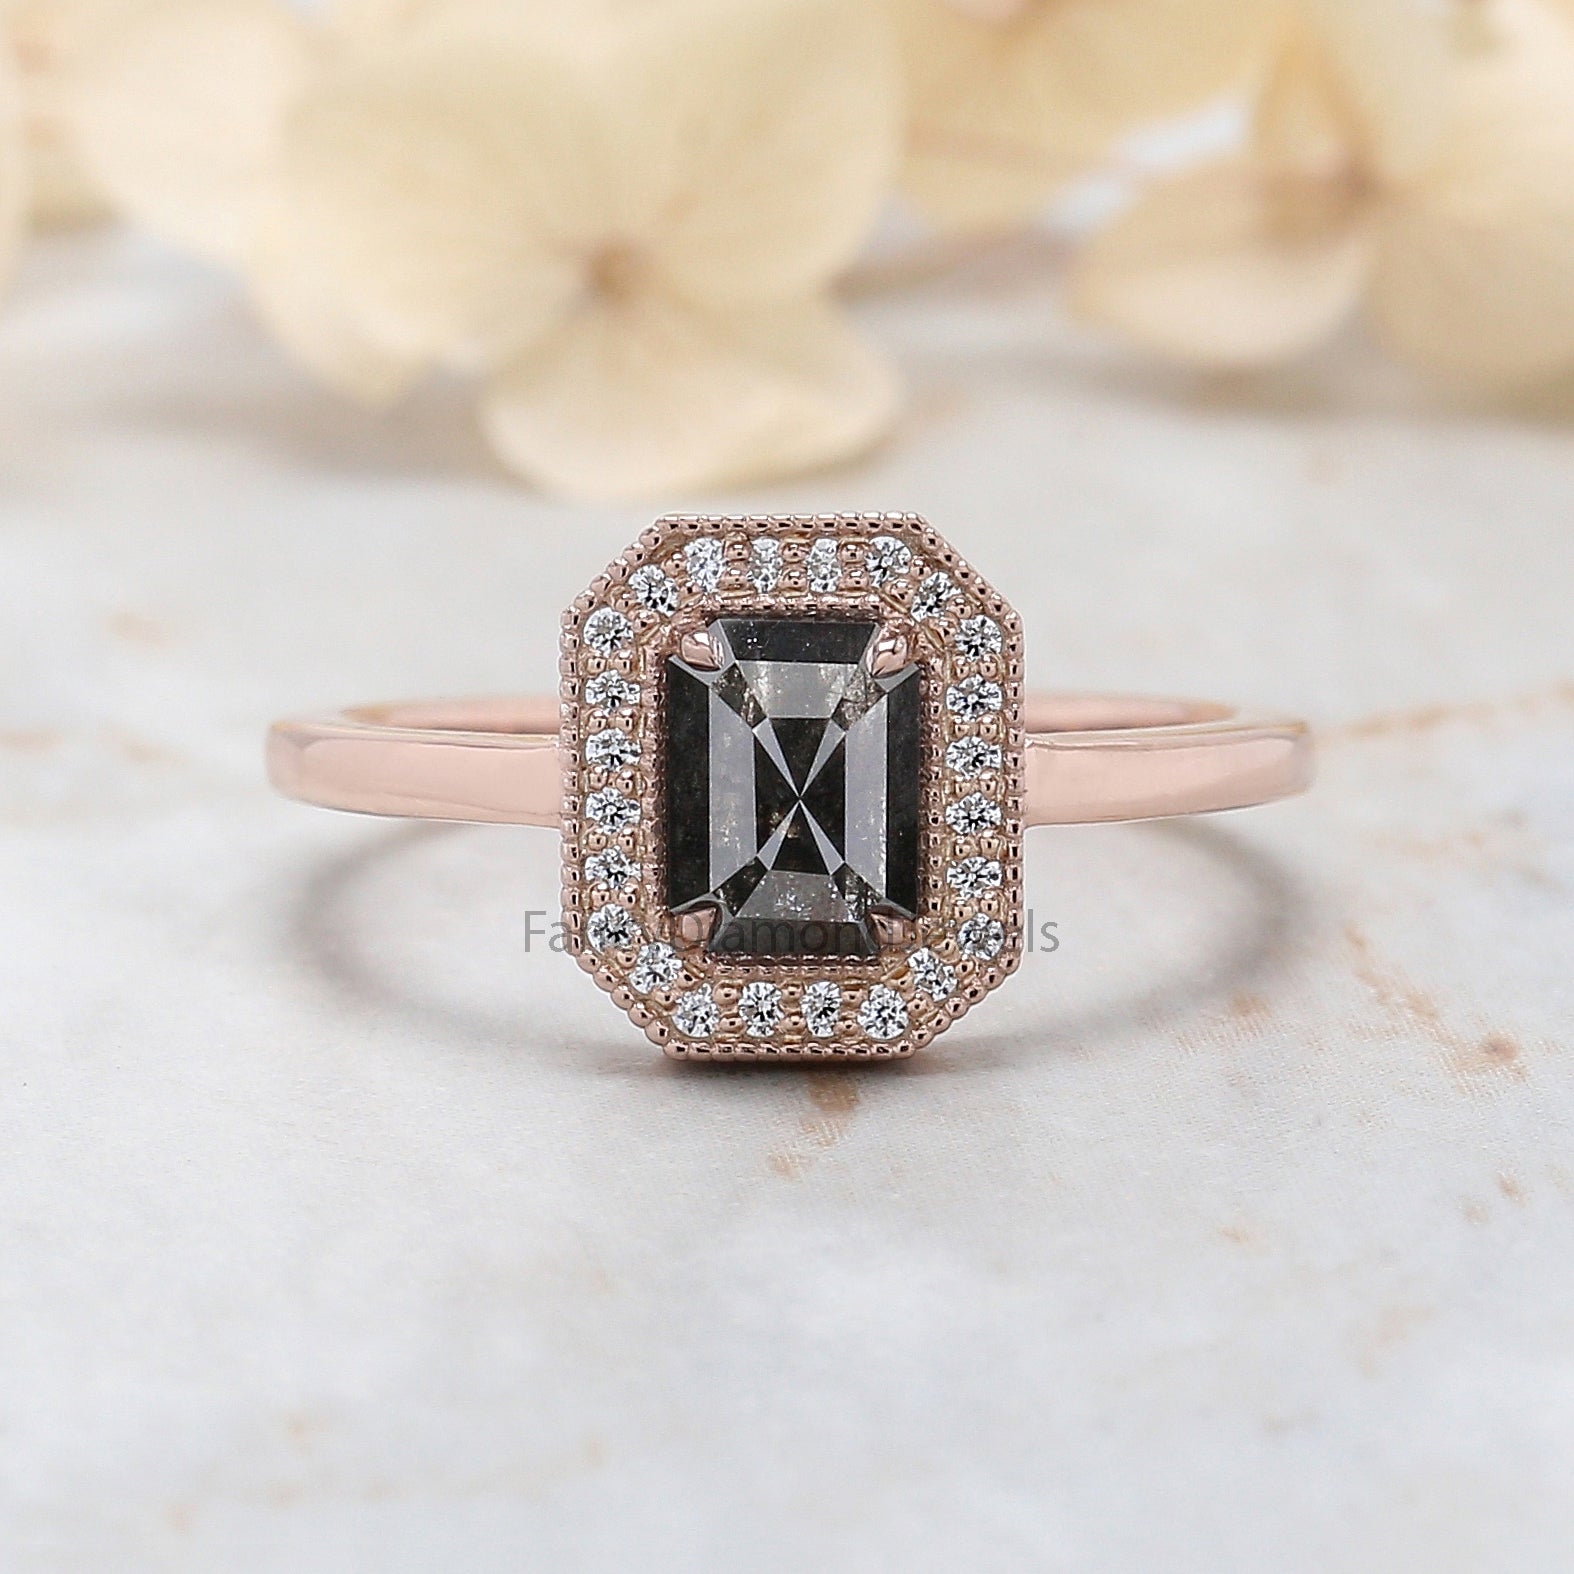 Emerald Cut Salt And Pepper Diamond Ring 0.84 Ct 6.20 MM Emerald Diamond Ring 14K Solid Rose Gold Silver Engagement Ring Gift For Her QN257